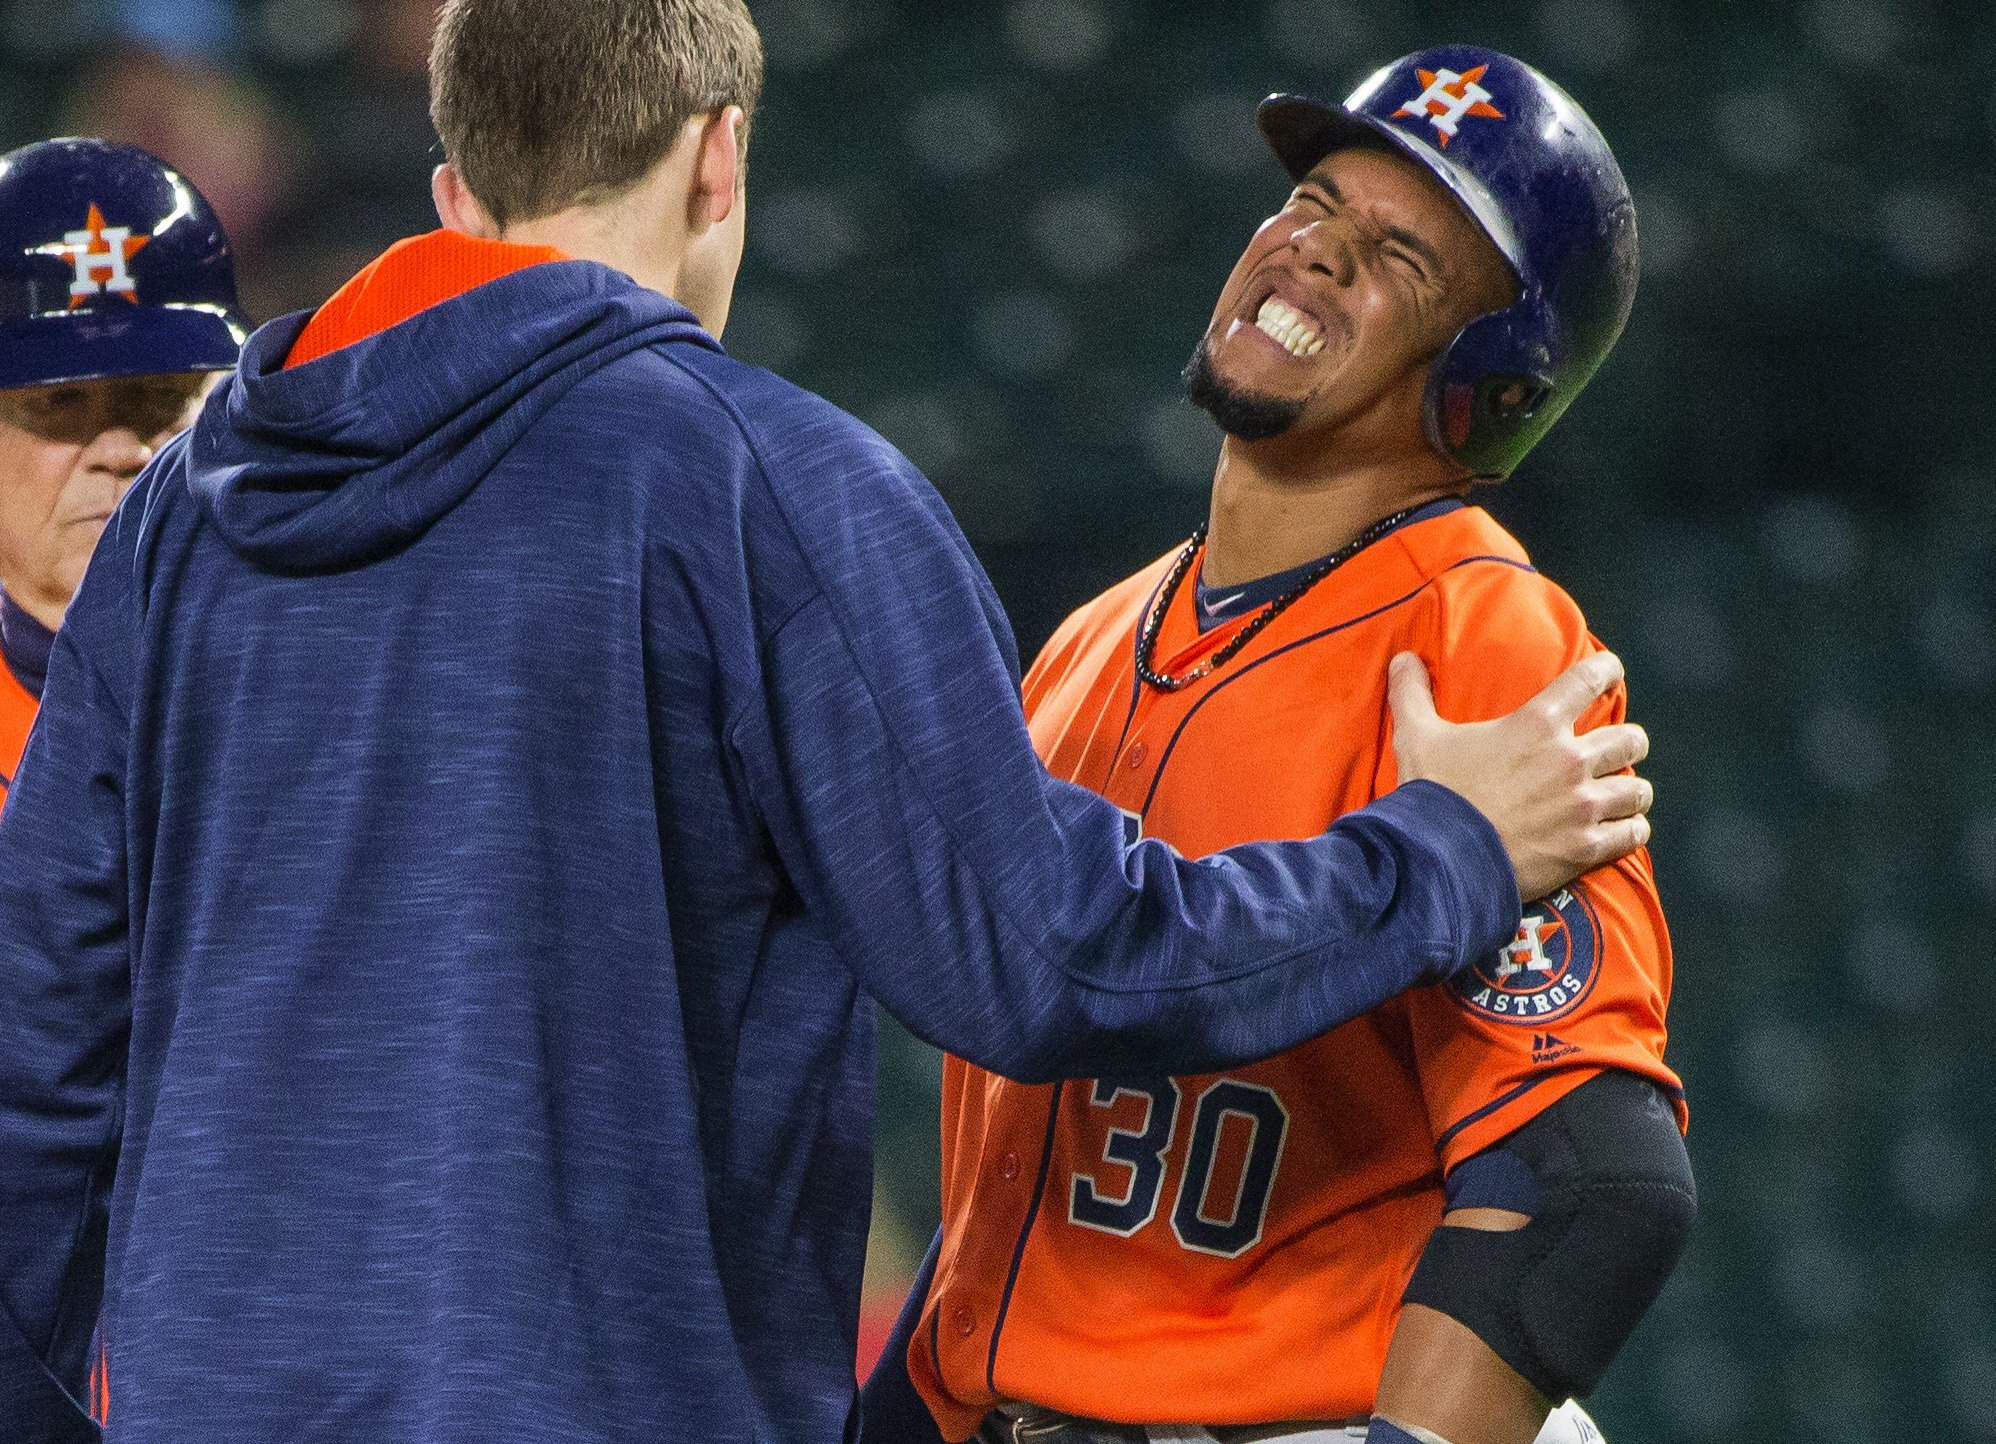 Astros report: Carlos Gomez day-to-day after taking pitch on hand